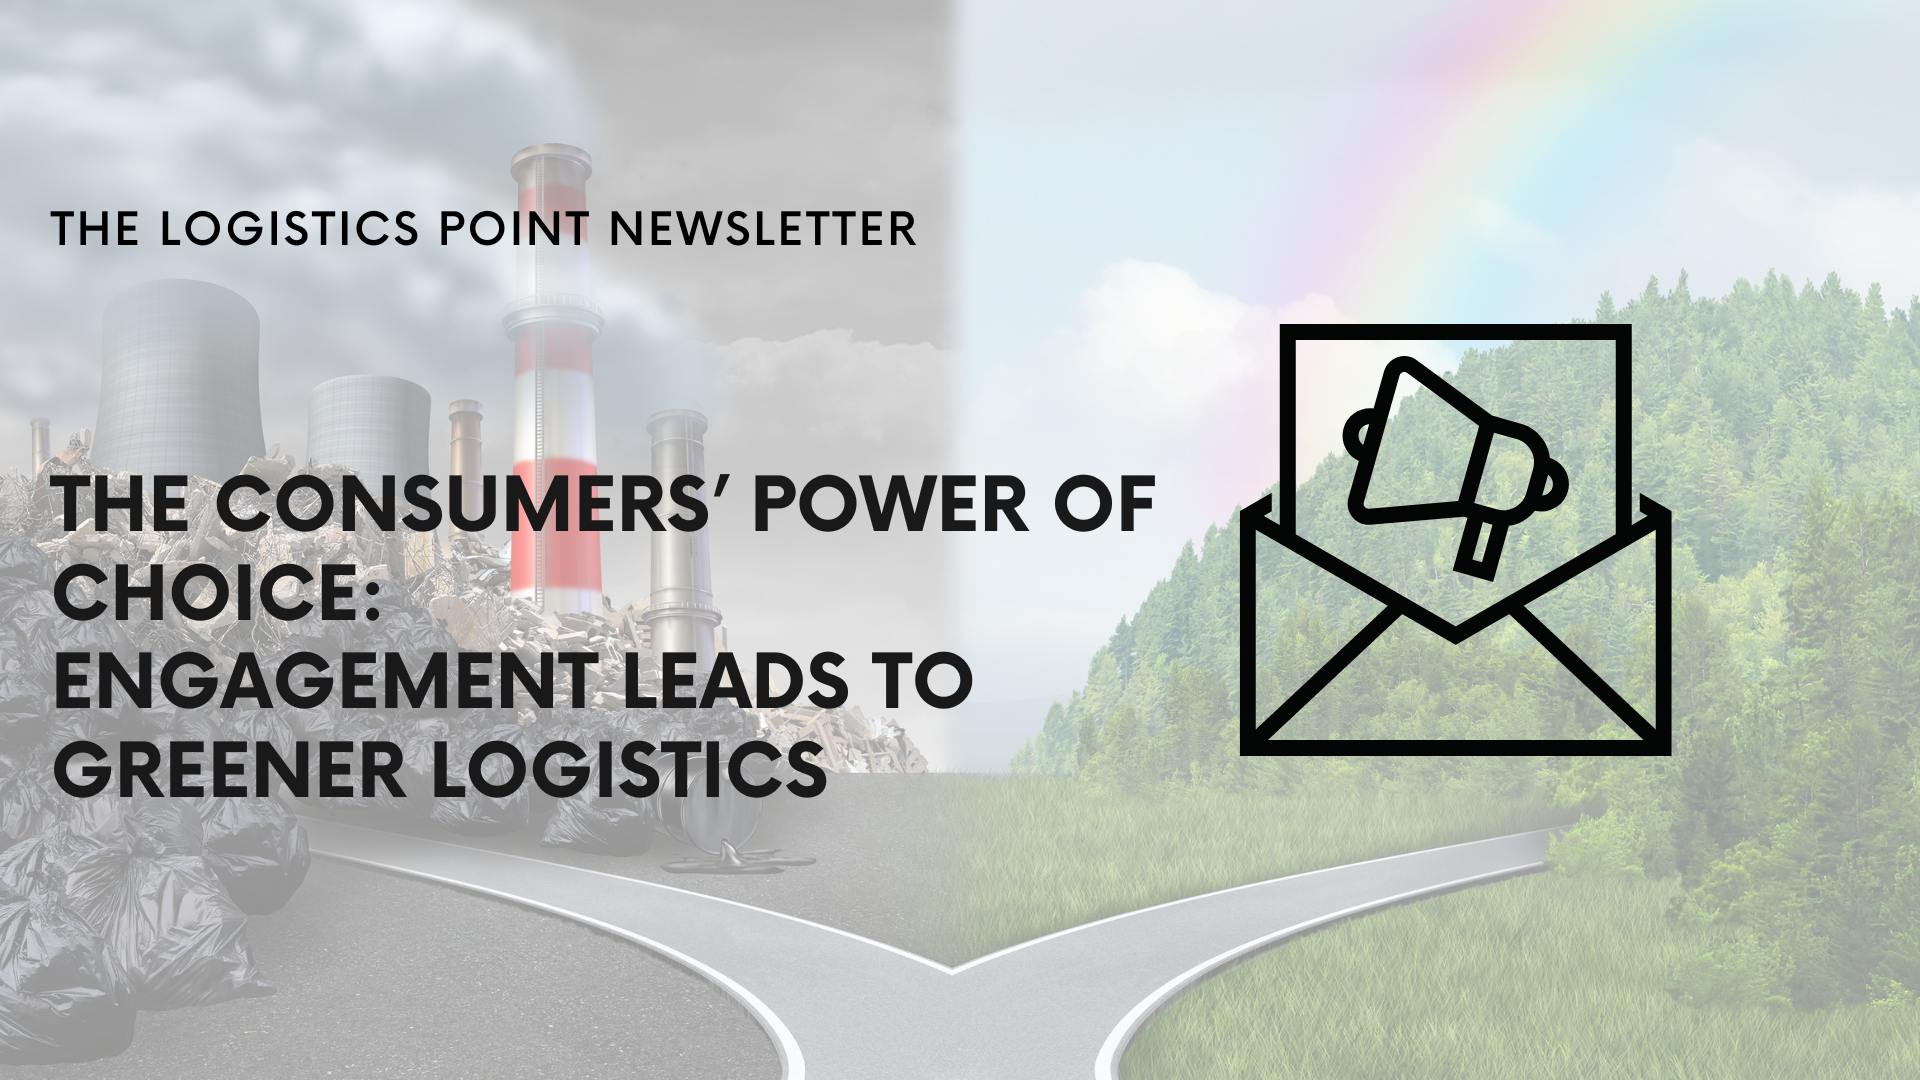 The Consumers’ Power of Choice: Engagement Leads To Greener Logistics